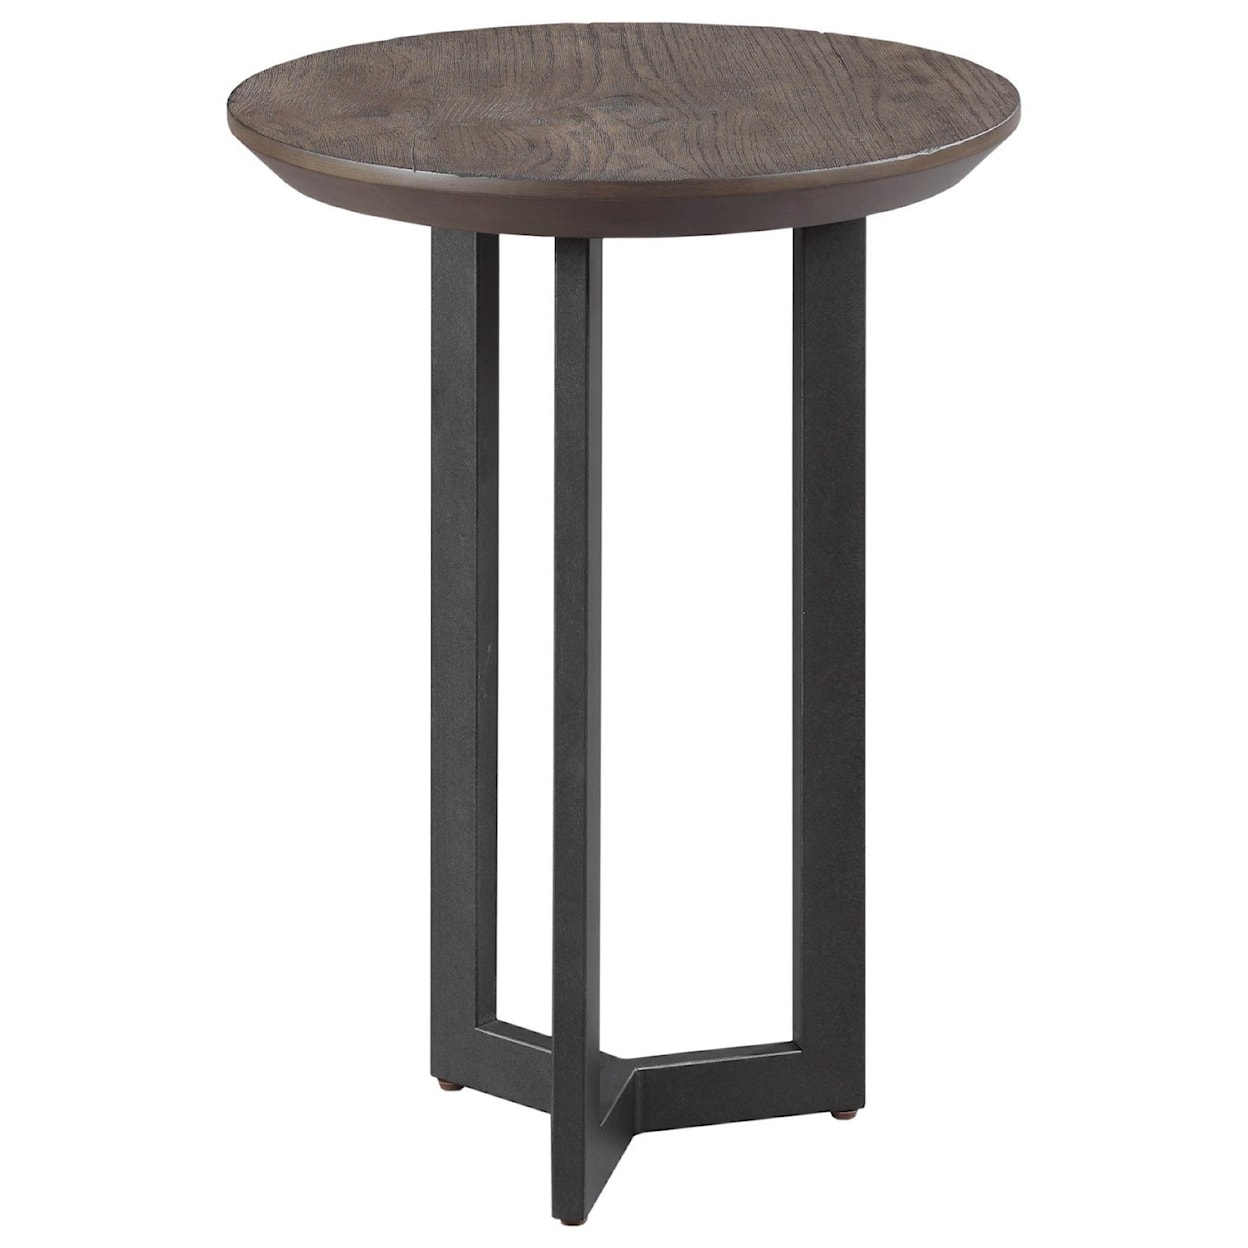 England Graystone Round Chairside Table